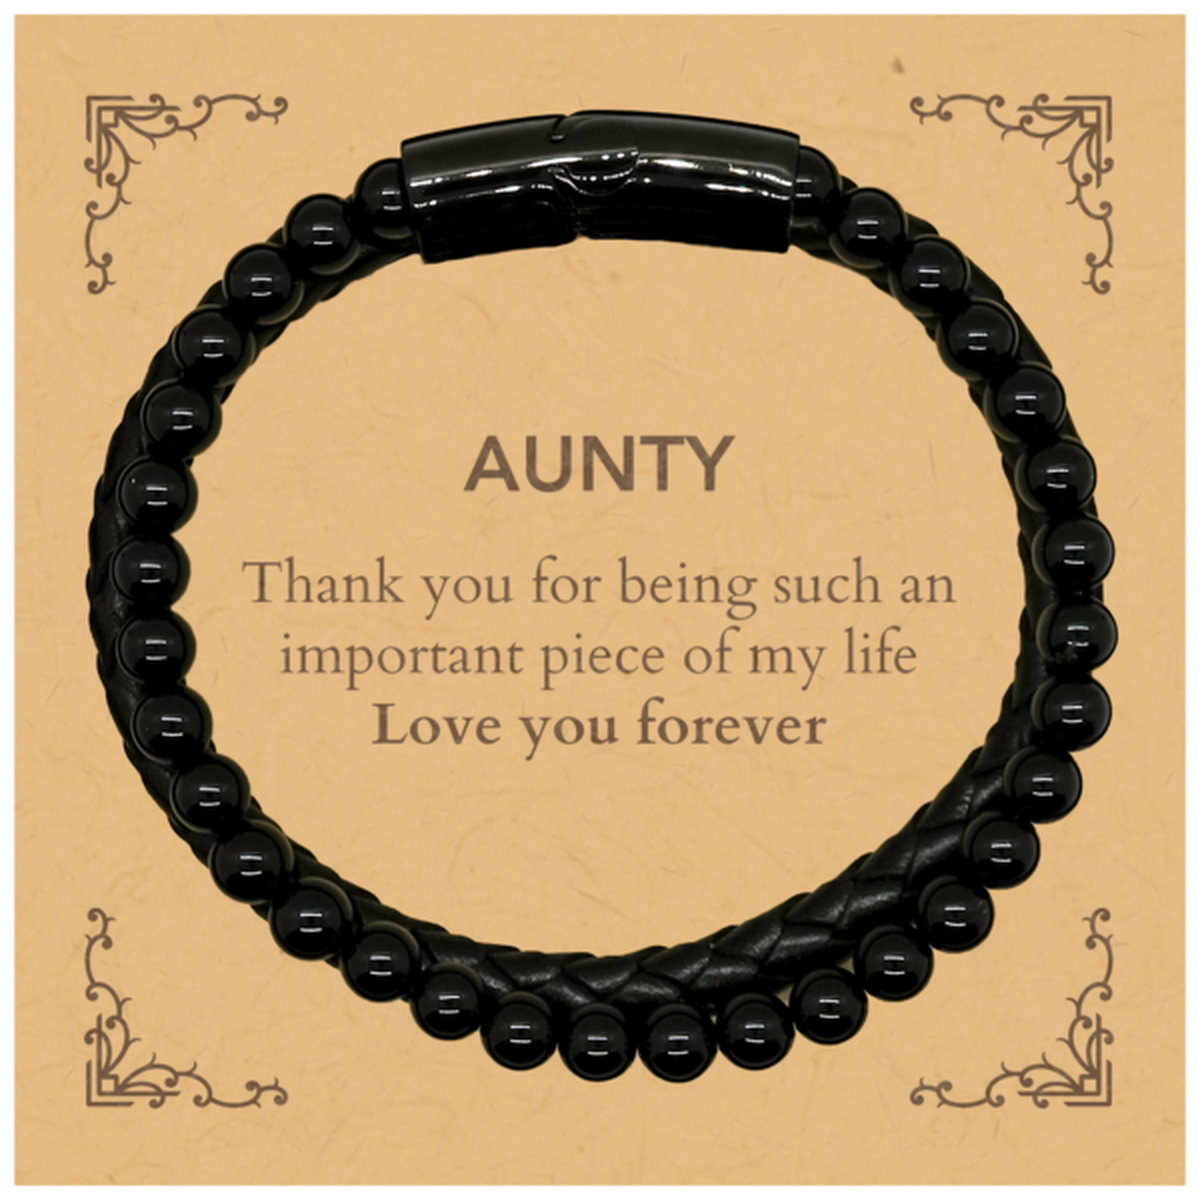 Appropriate Aunty Stone Leather Bracelets Epic Birthday Gifts for Aunty Thank you for being such an important piece of my life Aunty Christmas Mothers Fathers Day